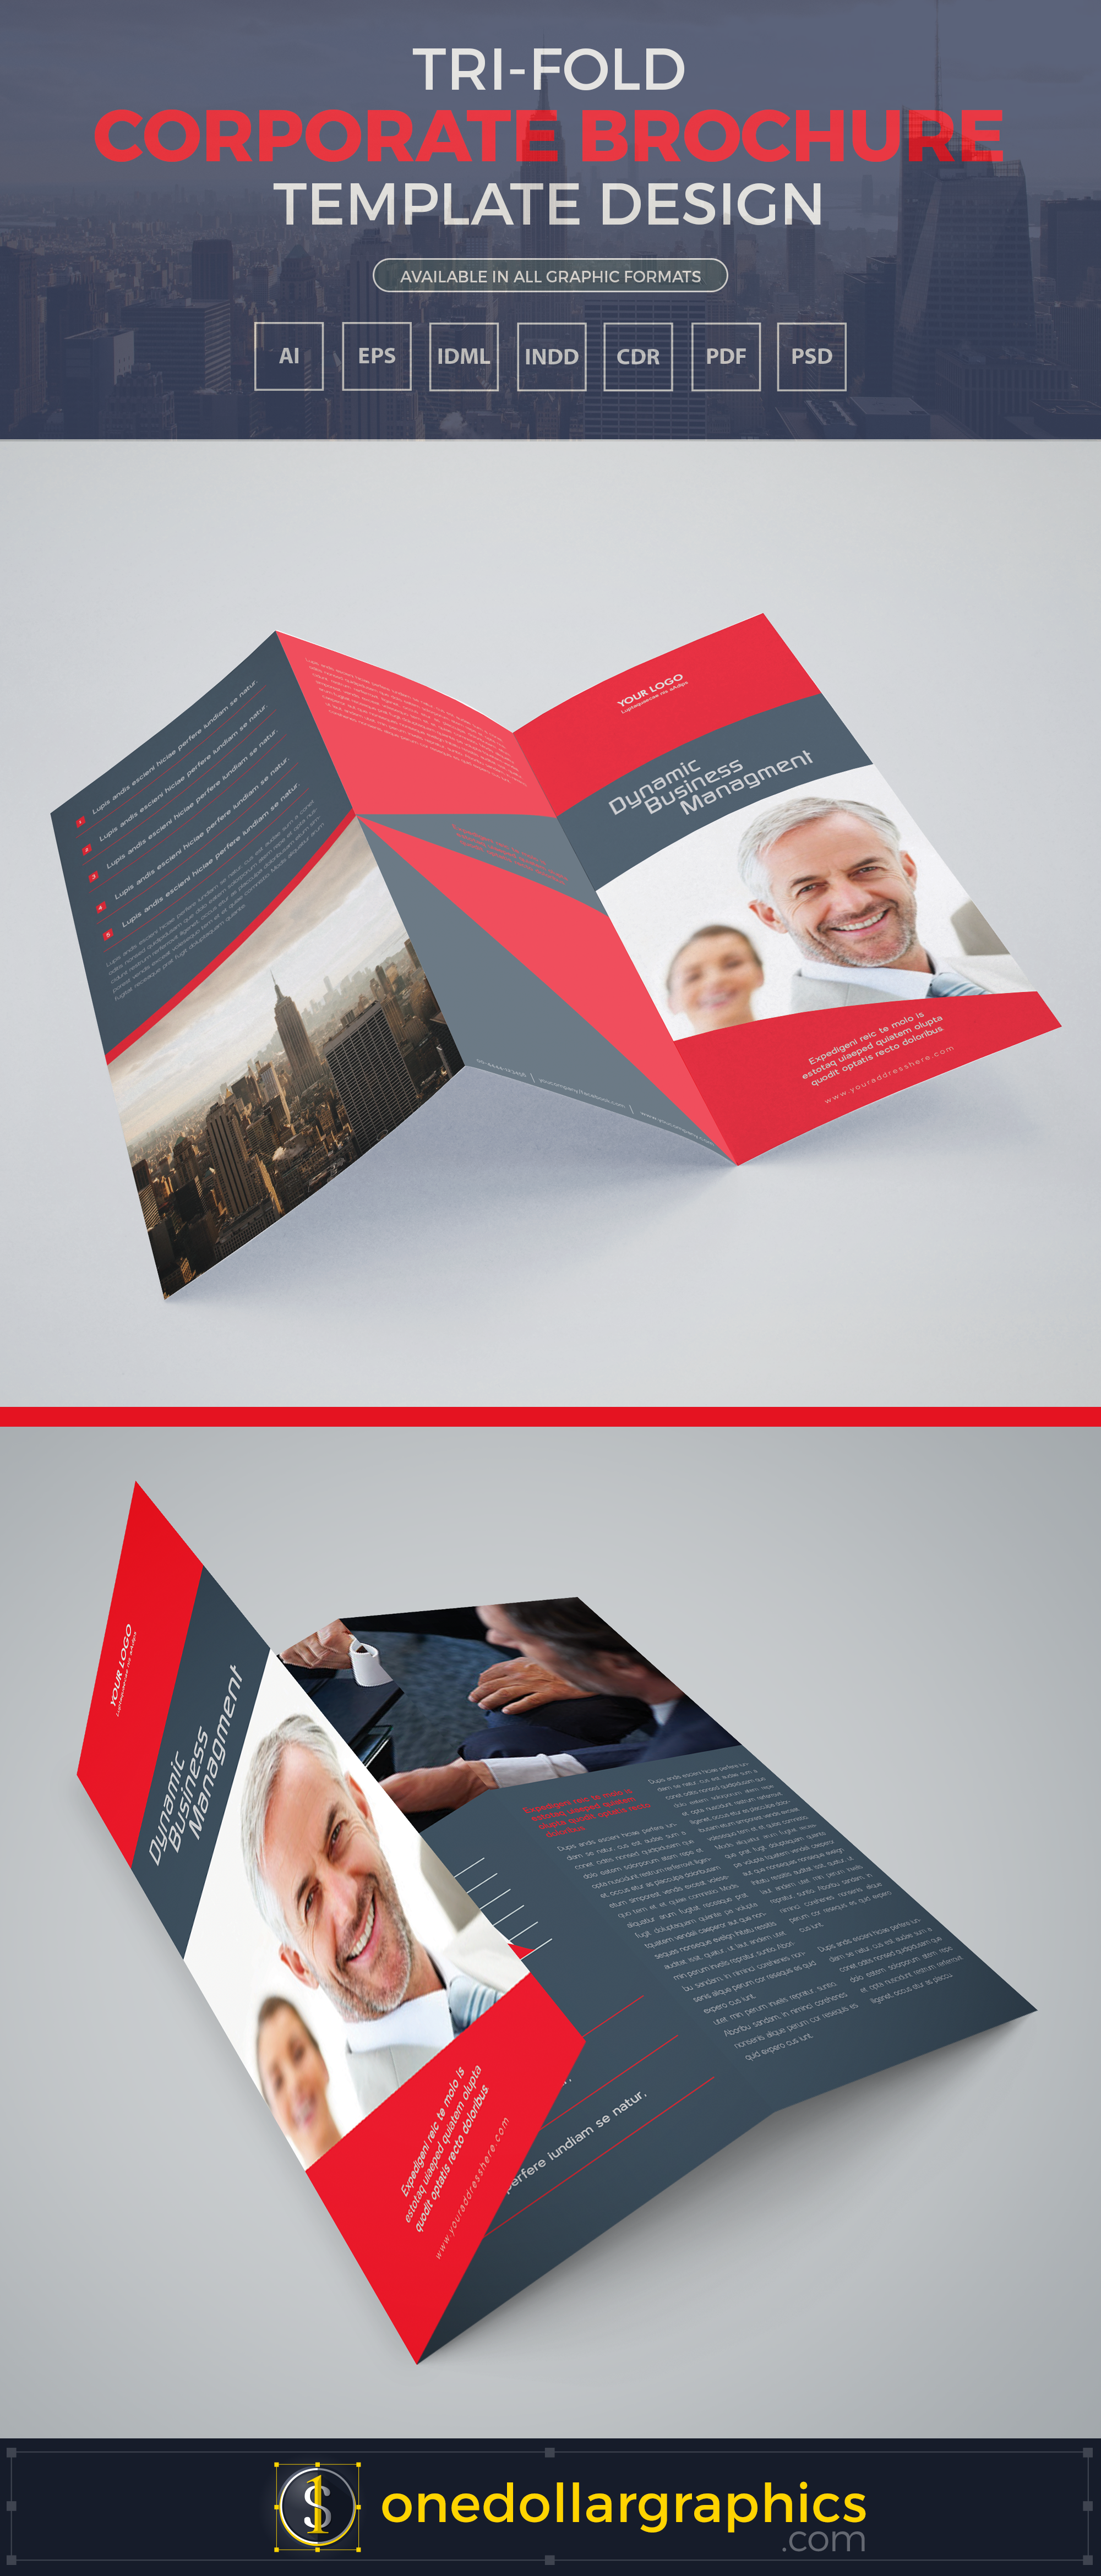 A4 Corporate TriFold Brochure Template Design in Ai, EPS, CDR, PDF